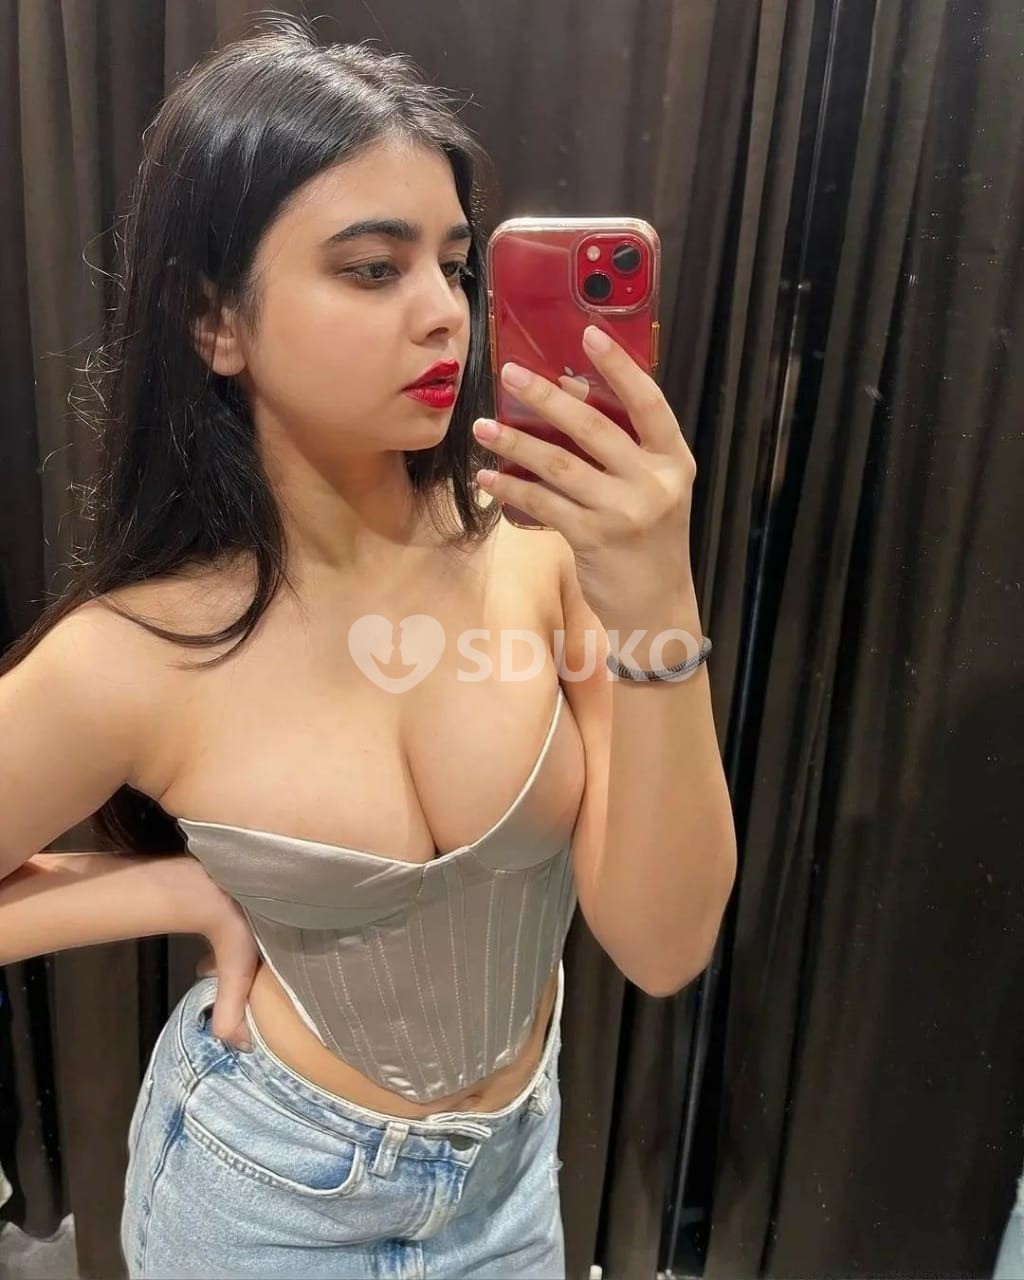 HIMAYATNAGAR VIP TODAY 😜;LOW PRICE ESCORT 🥰SERVICE 100% SAFE AND SECURE ANYTIME CALL ME 24 X 7 SERVICE AVAILABLE 1